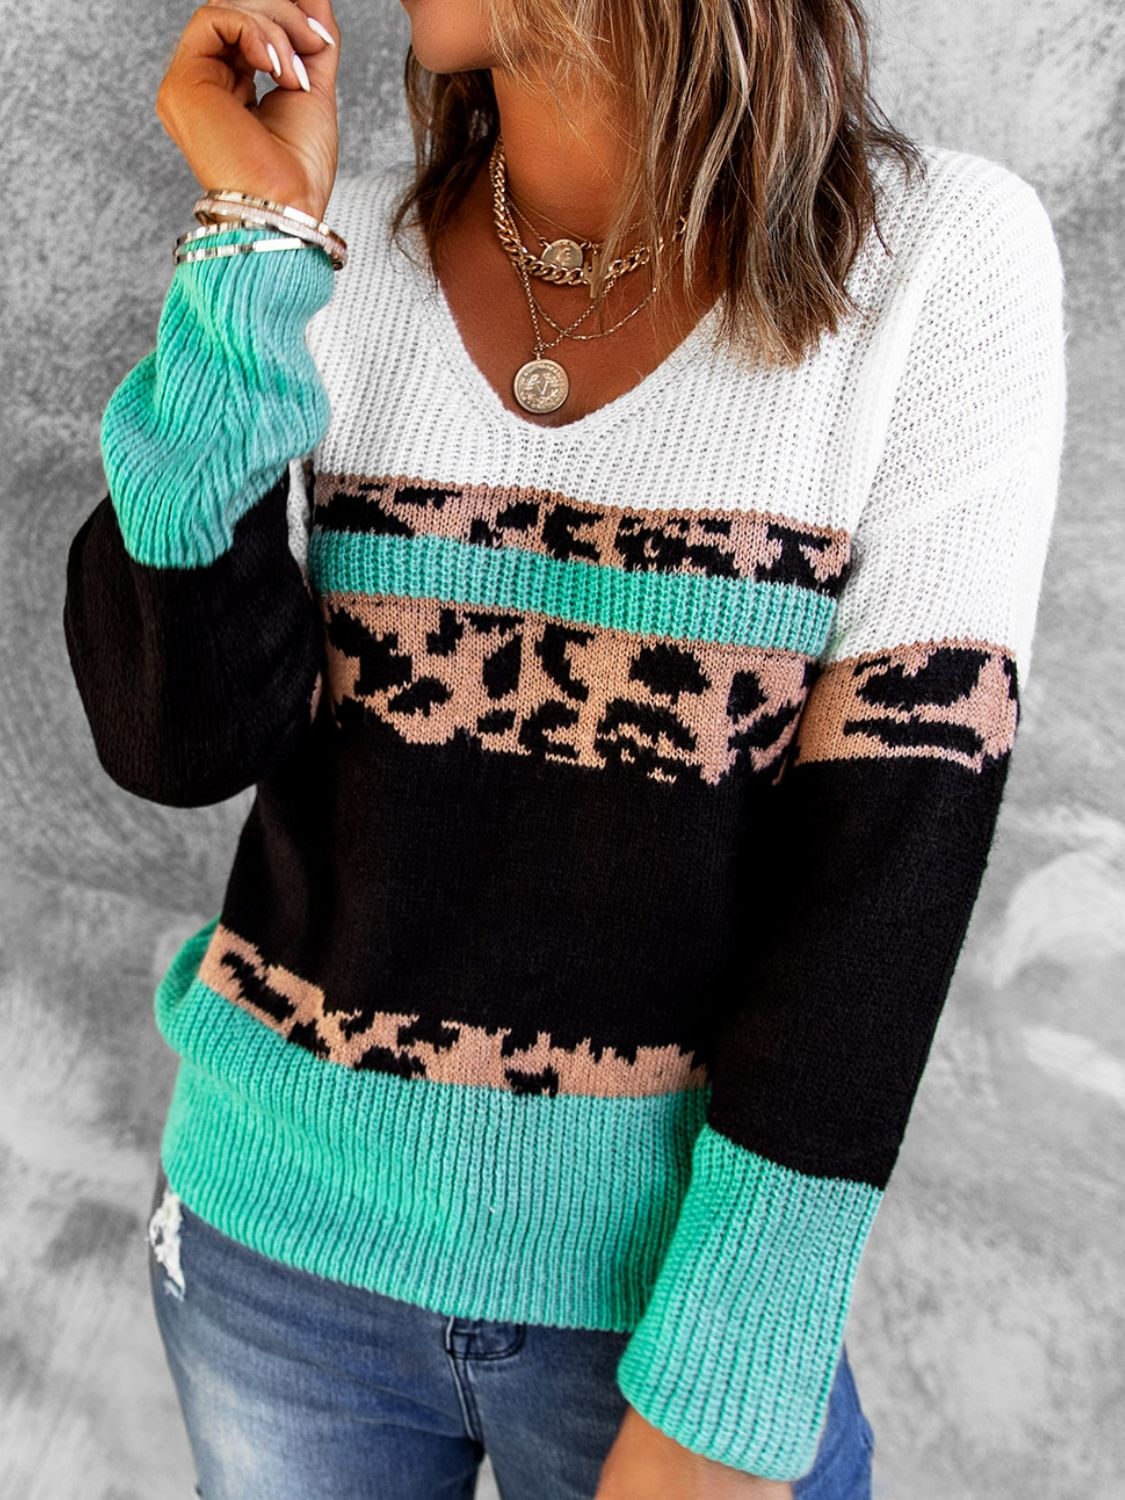 Leopard V-Neck Rib-Knit Sweater - The Lakeside Boutique